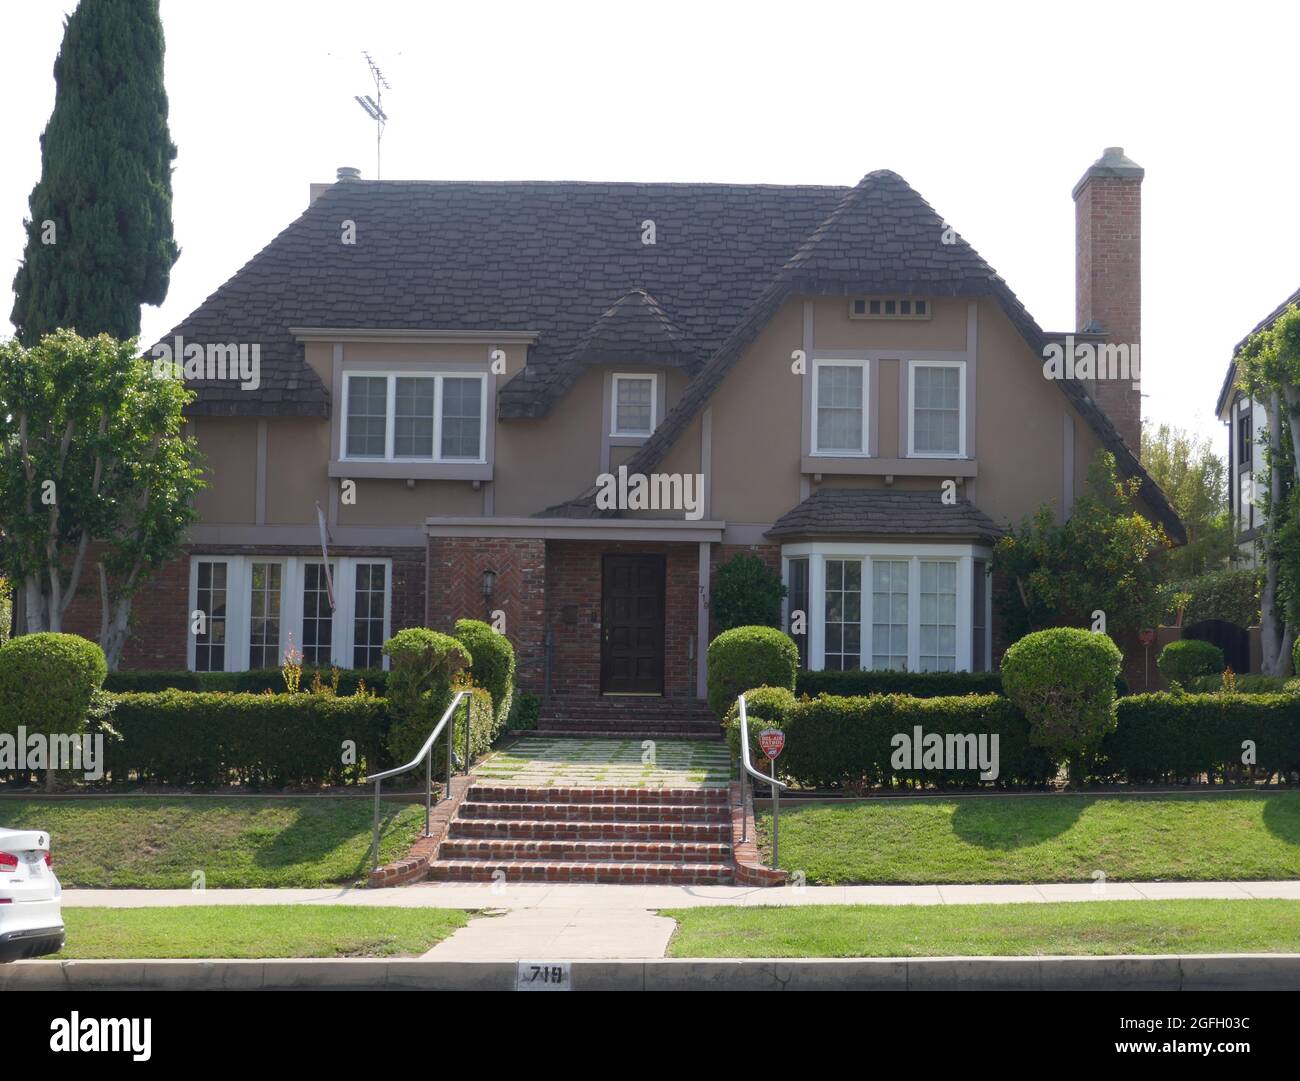 Beverly Hills, California, USA 24th August 2021 A general view of atmosphere of Director Richard Benjamin and Actress Paula Prentiss, Actor Arnold Lee, Actor Rod La Rocque and Actress Vilma Banky's Former Home/house on August 24, 2021 in Beverly Hills, California, USA. Photo by Barry King/Alamy Stock Photo Stock Photo